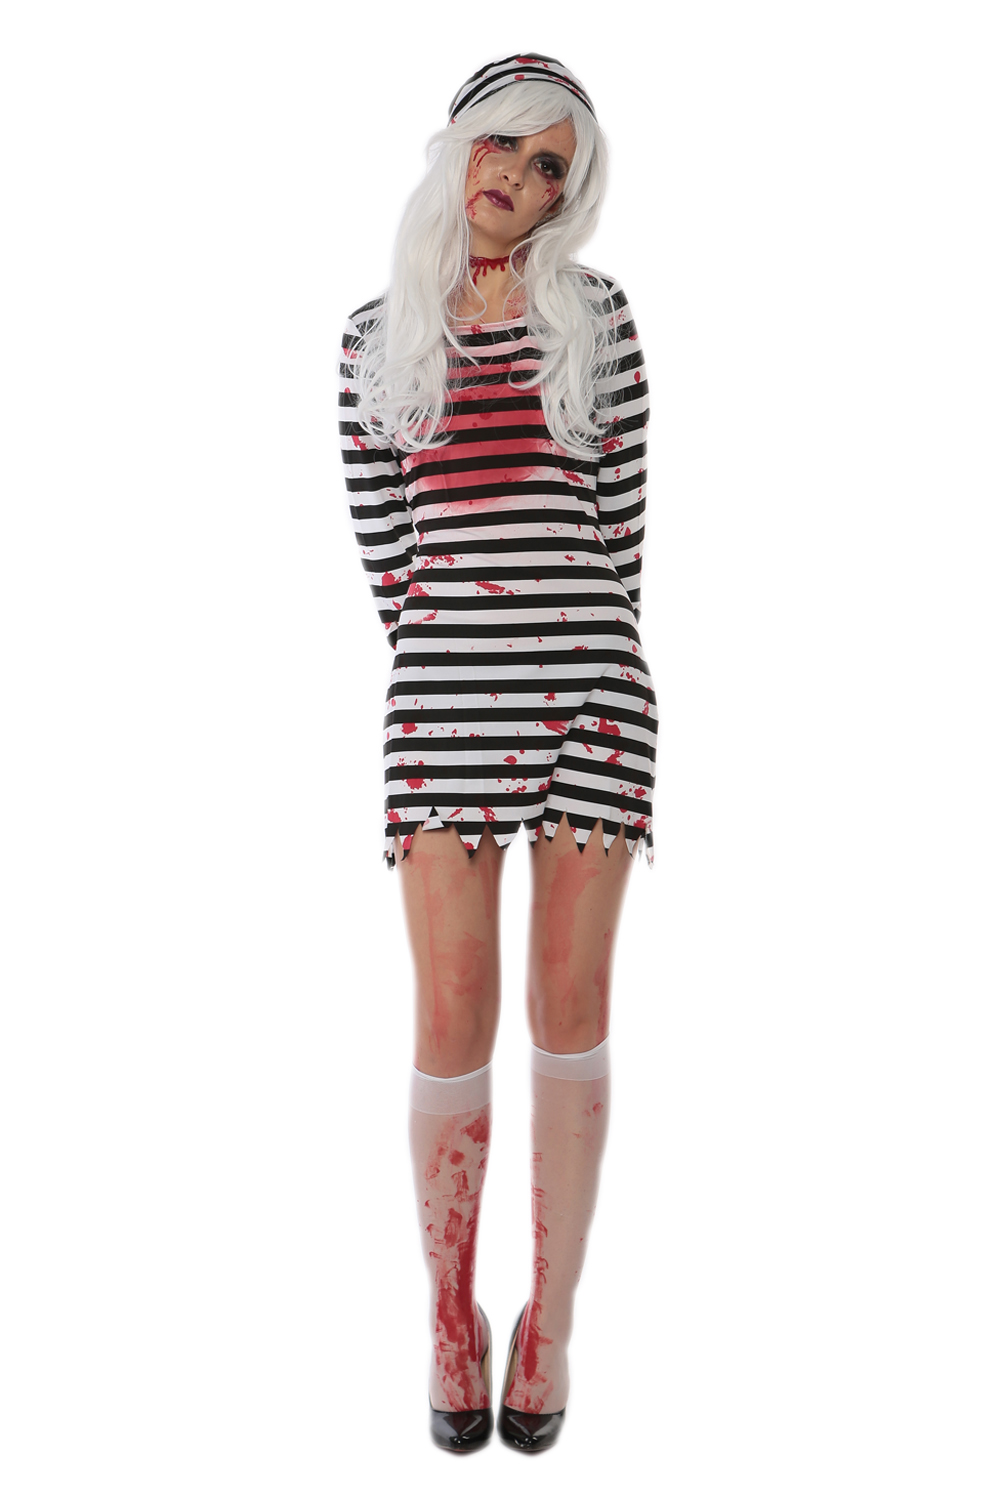 F1719 cosplay halloween infected prisoner costume,it comes with hat,dress